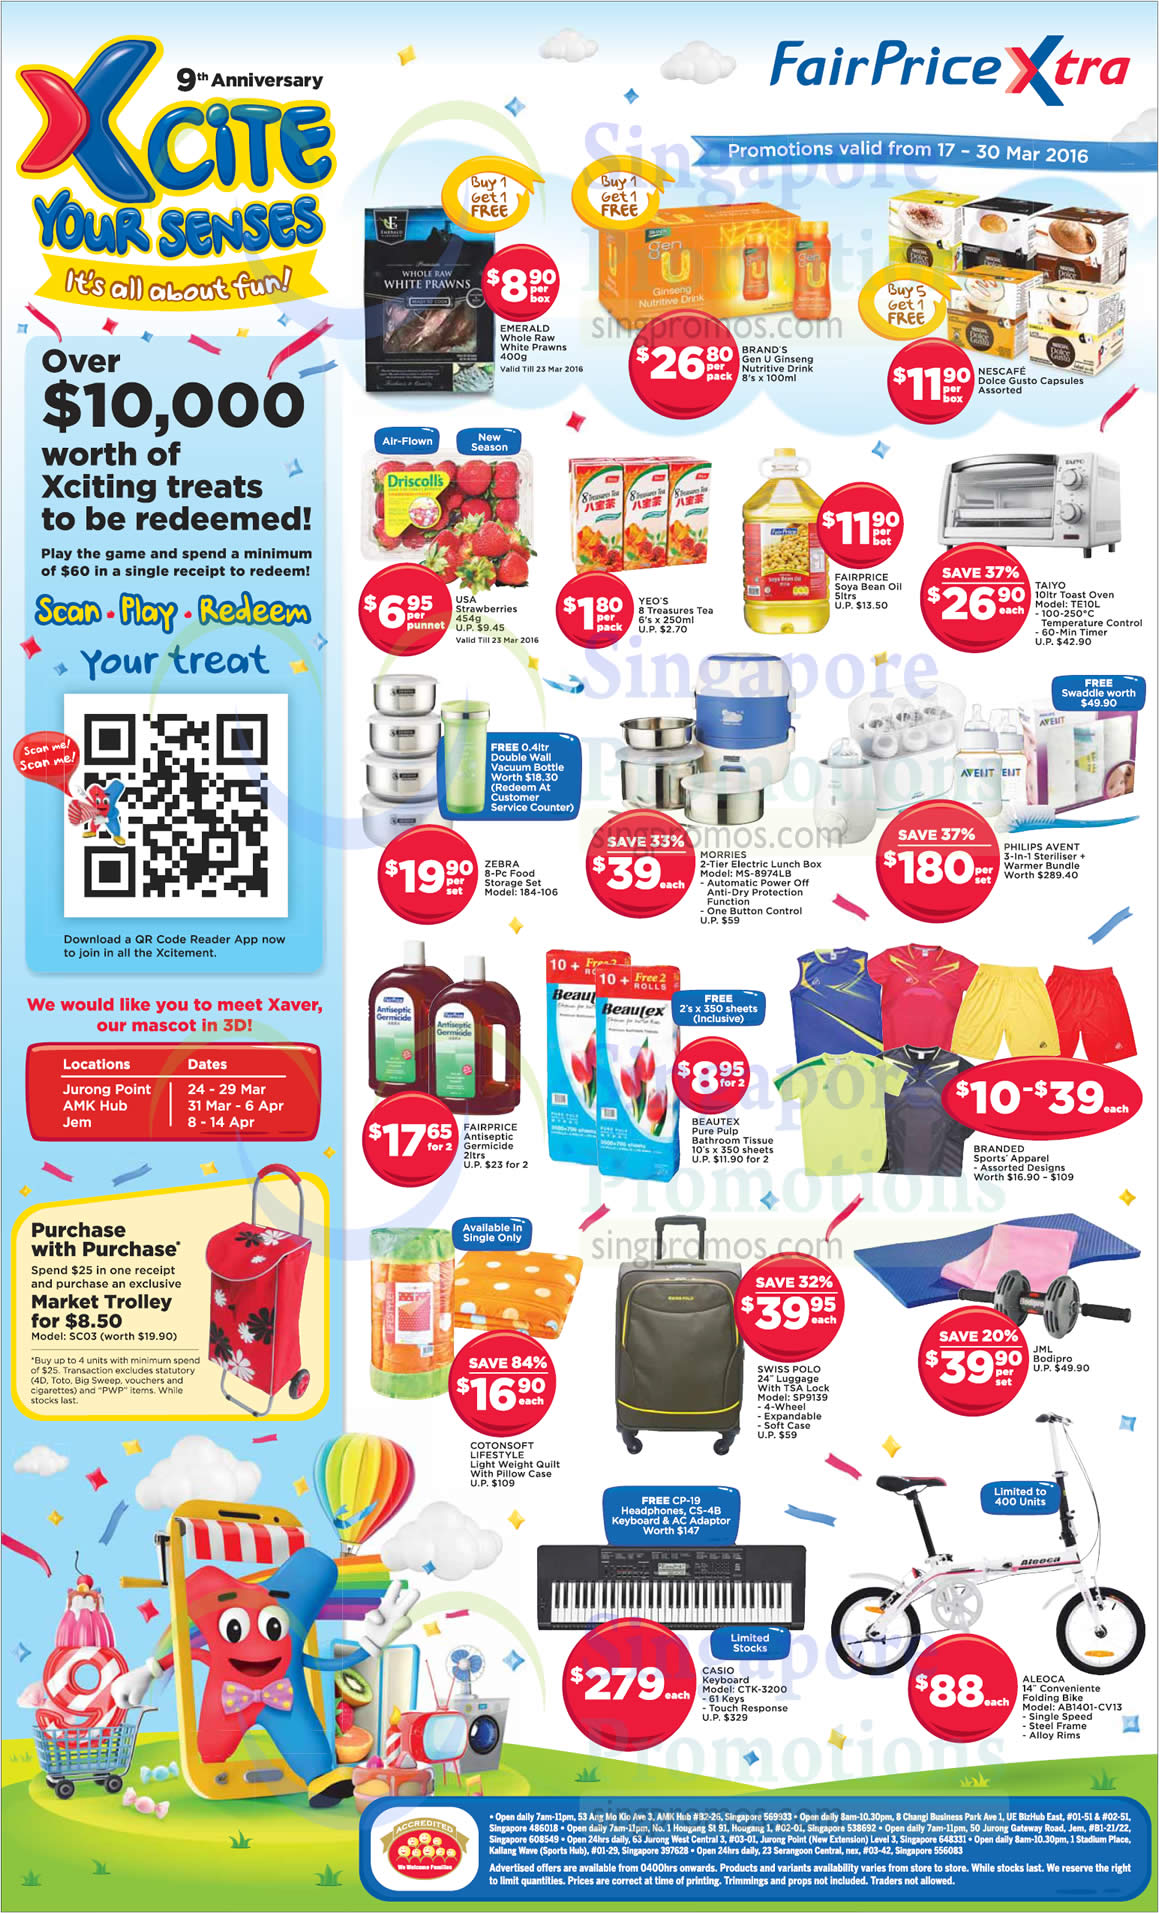 Featured image for Fairprice General & Europace Appliances Offers 17 - 30 Mar 2016